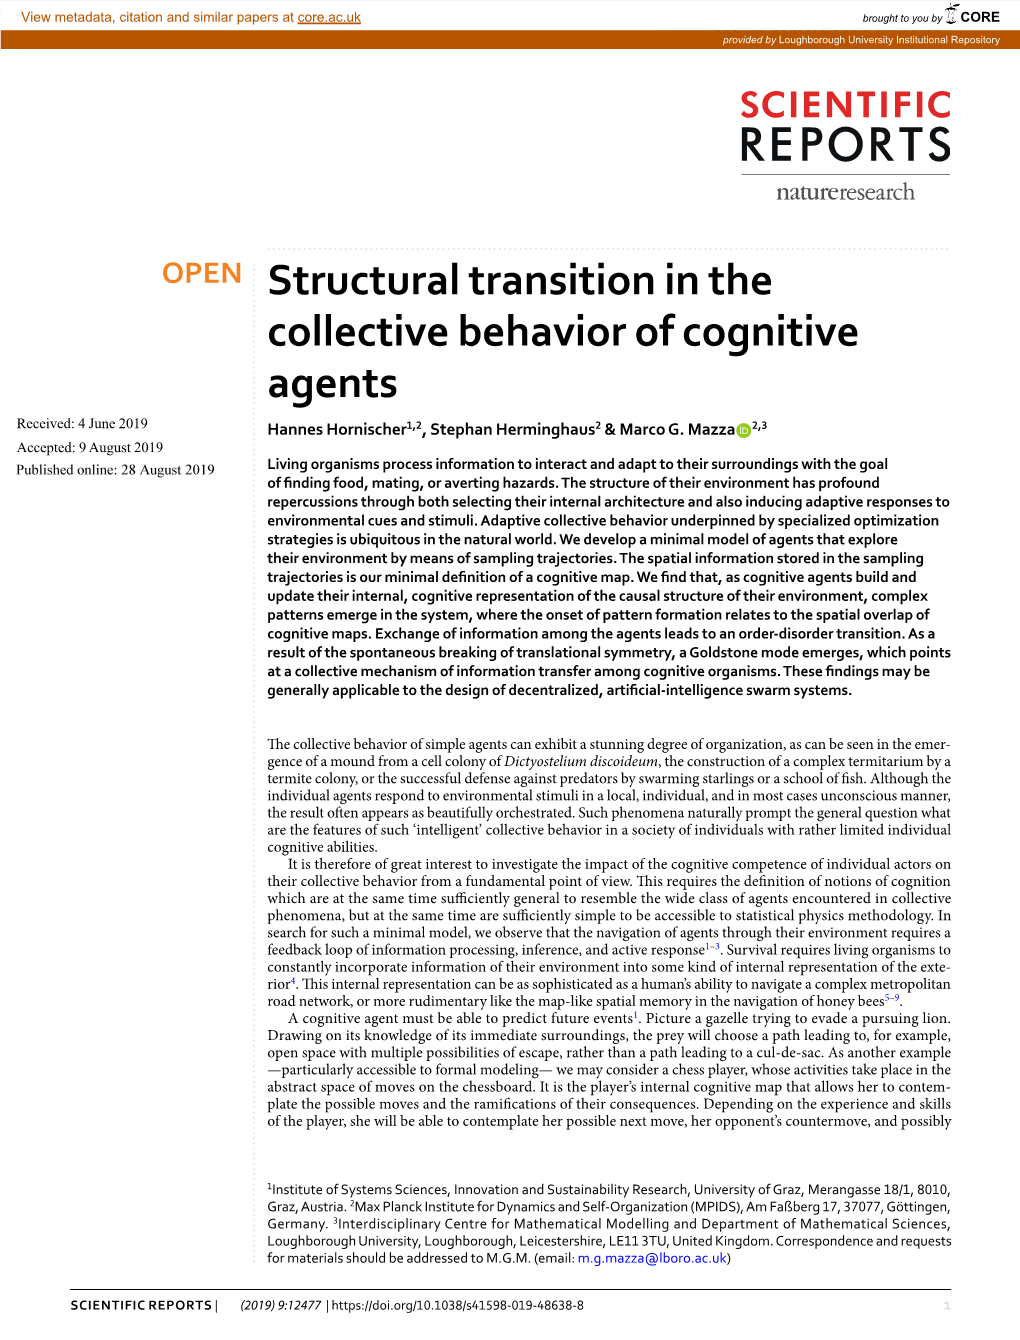 Structural Transition in the Collective Behavior of Cognitive Agents Received: 4 June 2019 Hannes Hornischer1,2, Stephan Herminghaus2 & Marco G